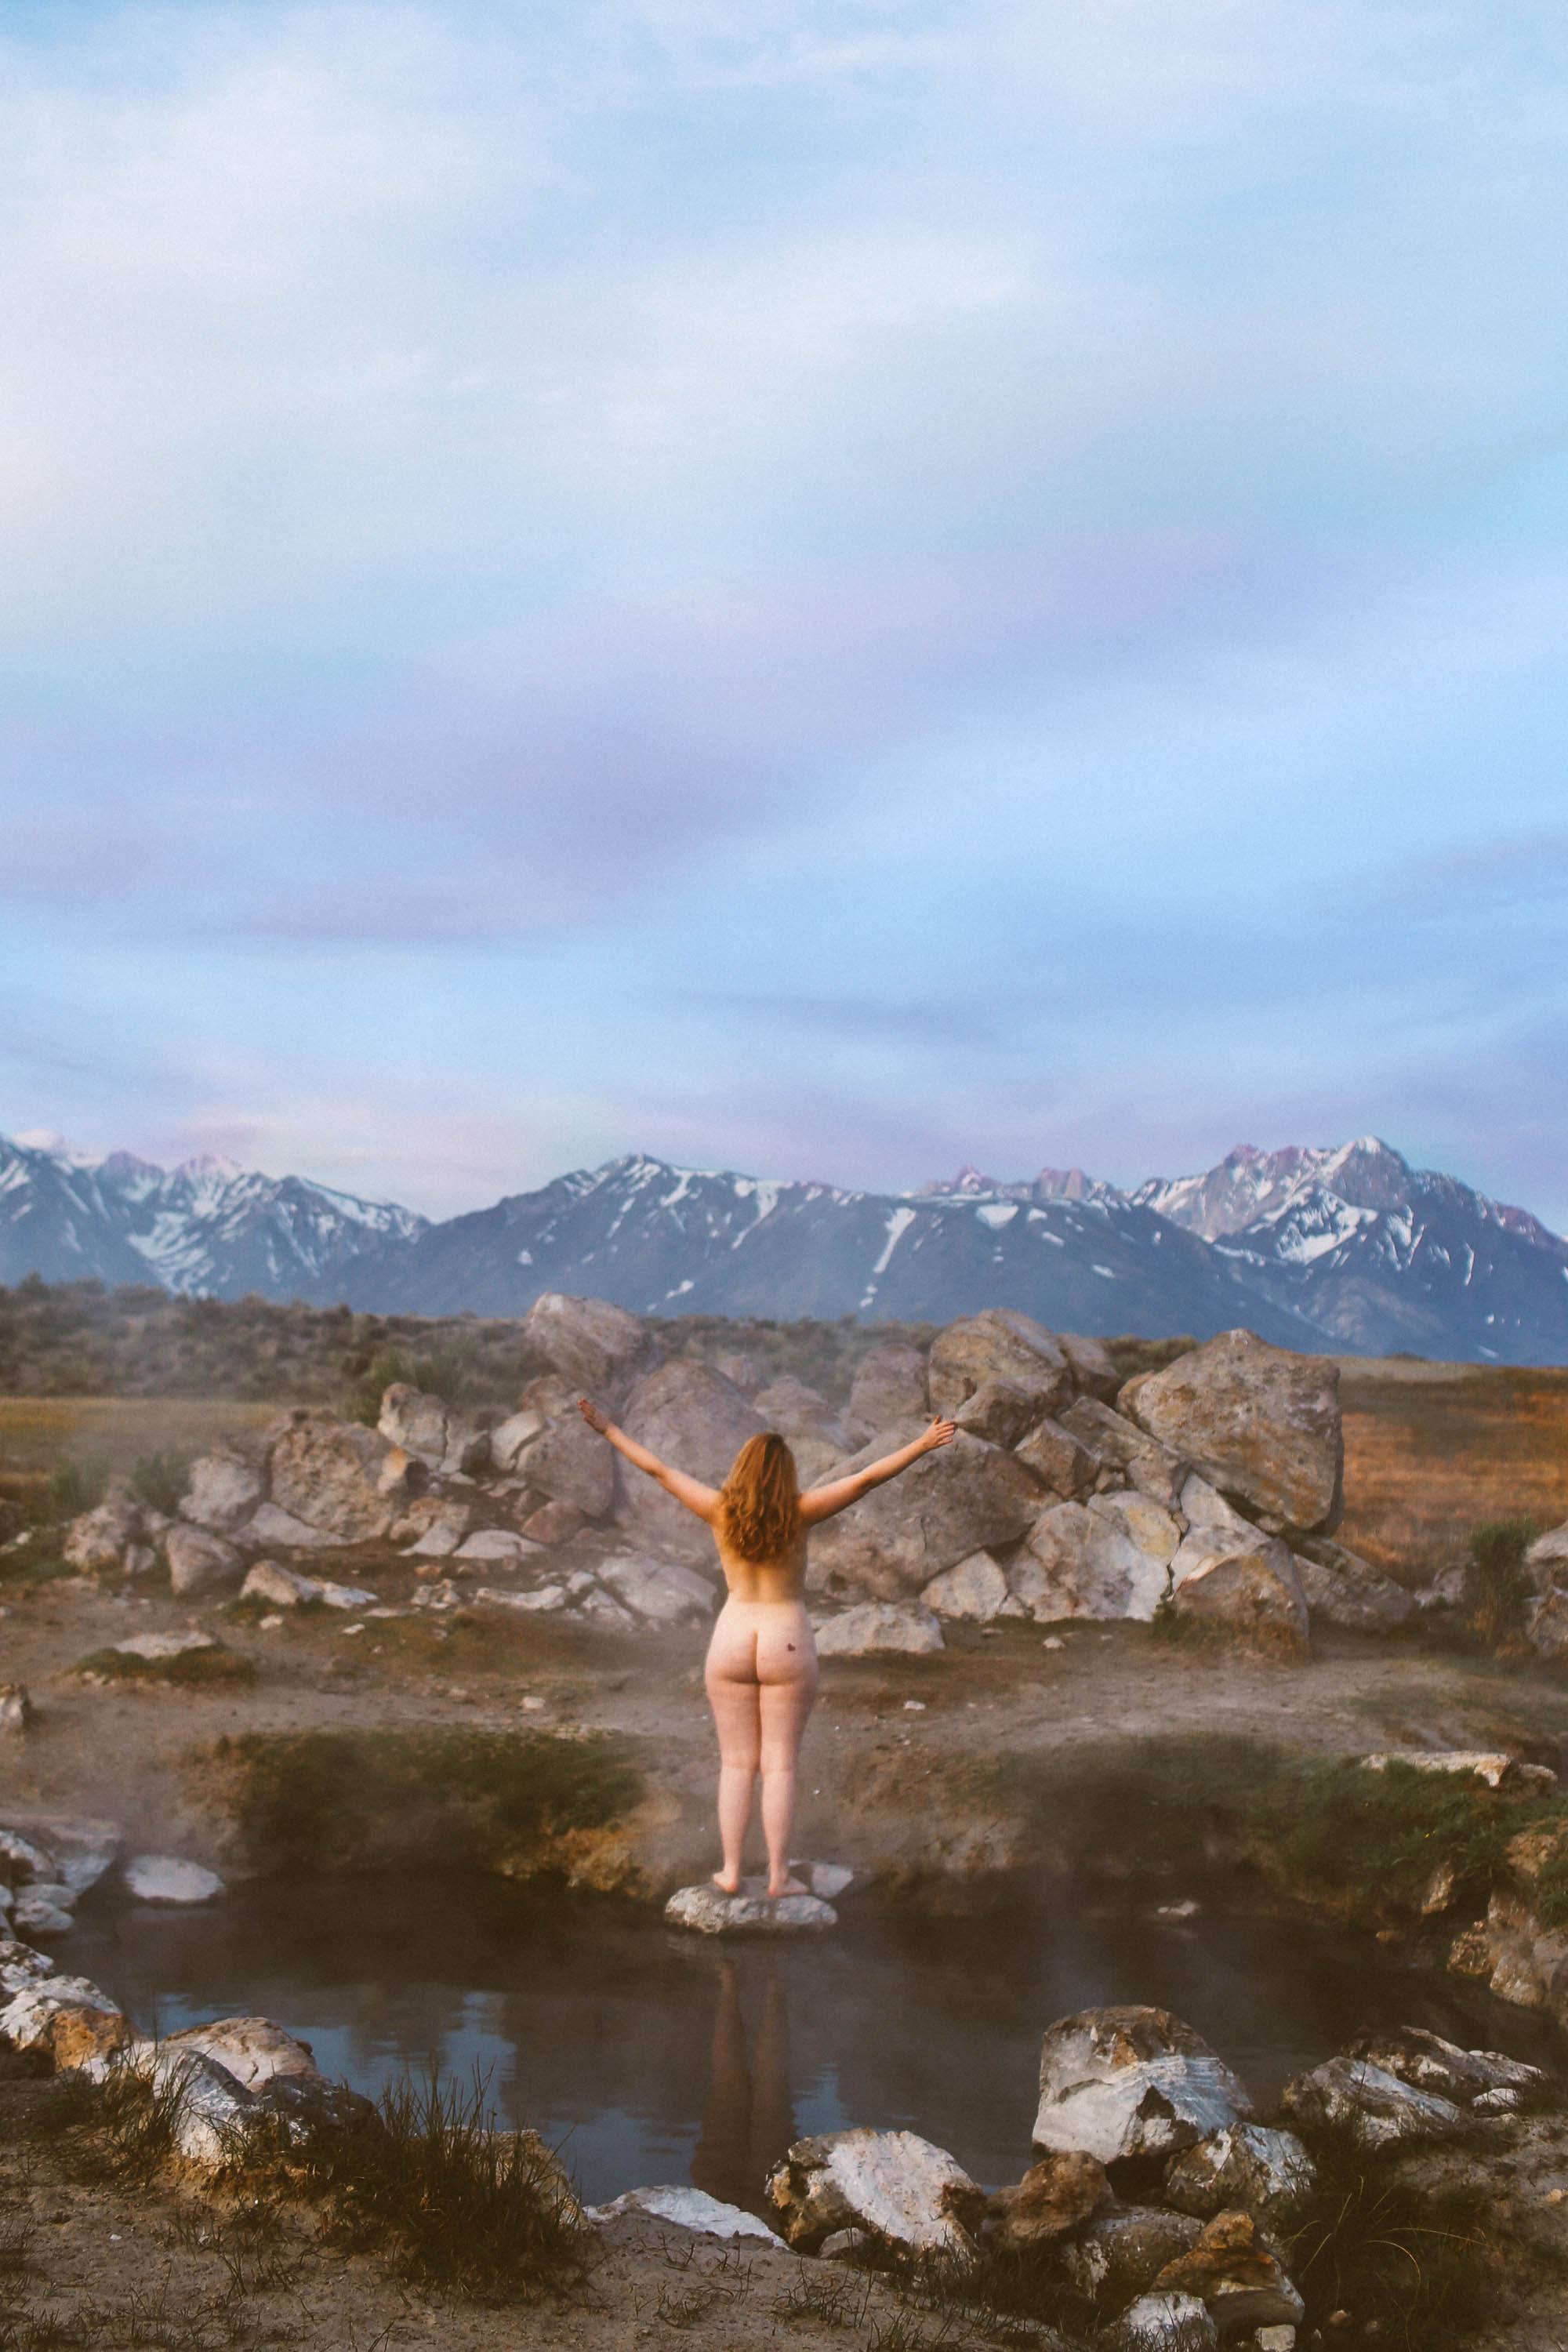 Woman standing naked on rock in a hot spring with snow capped mountains in the background